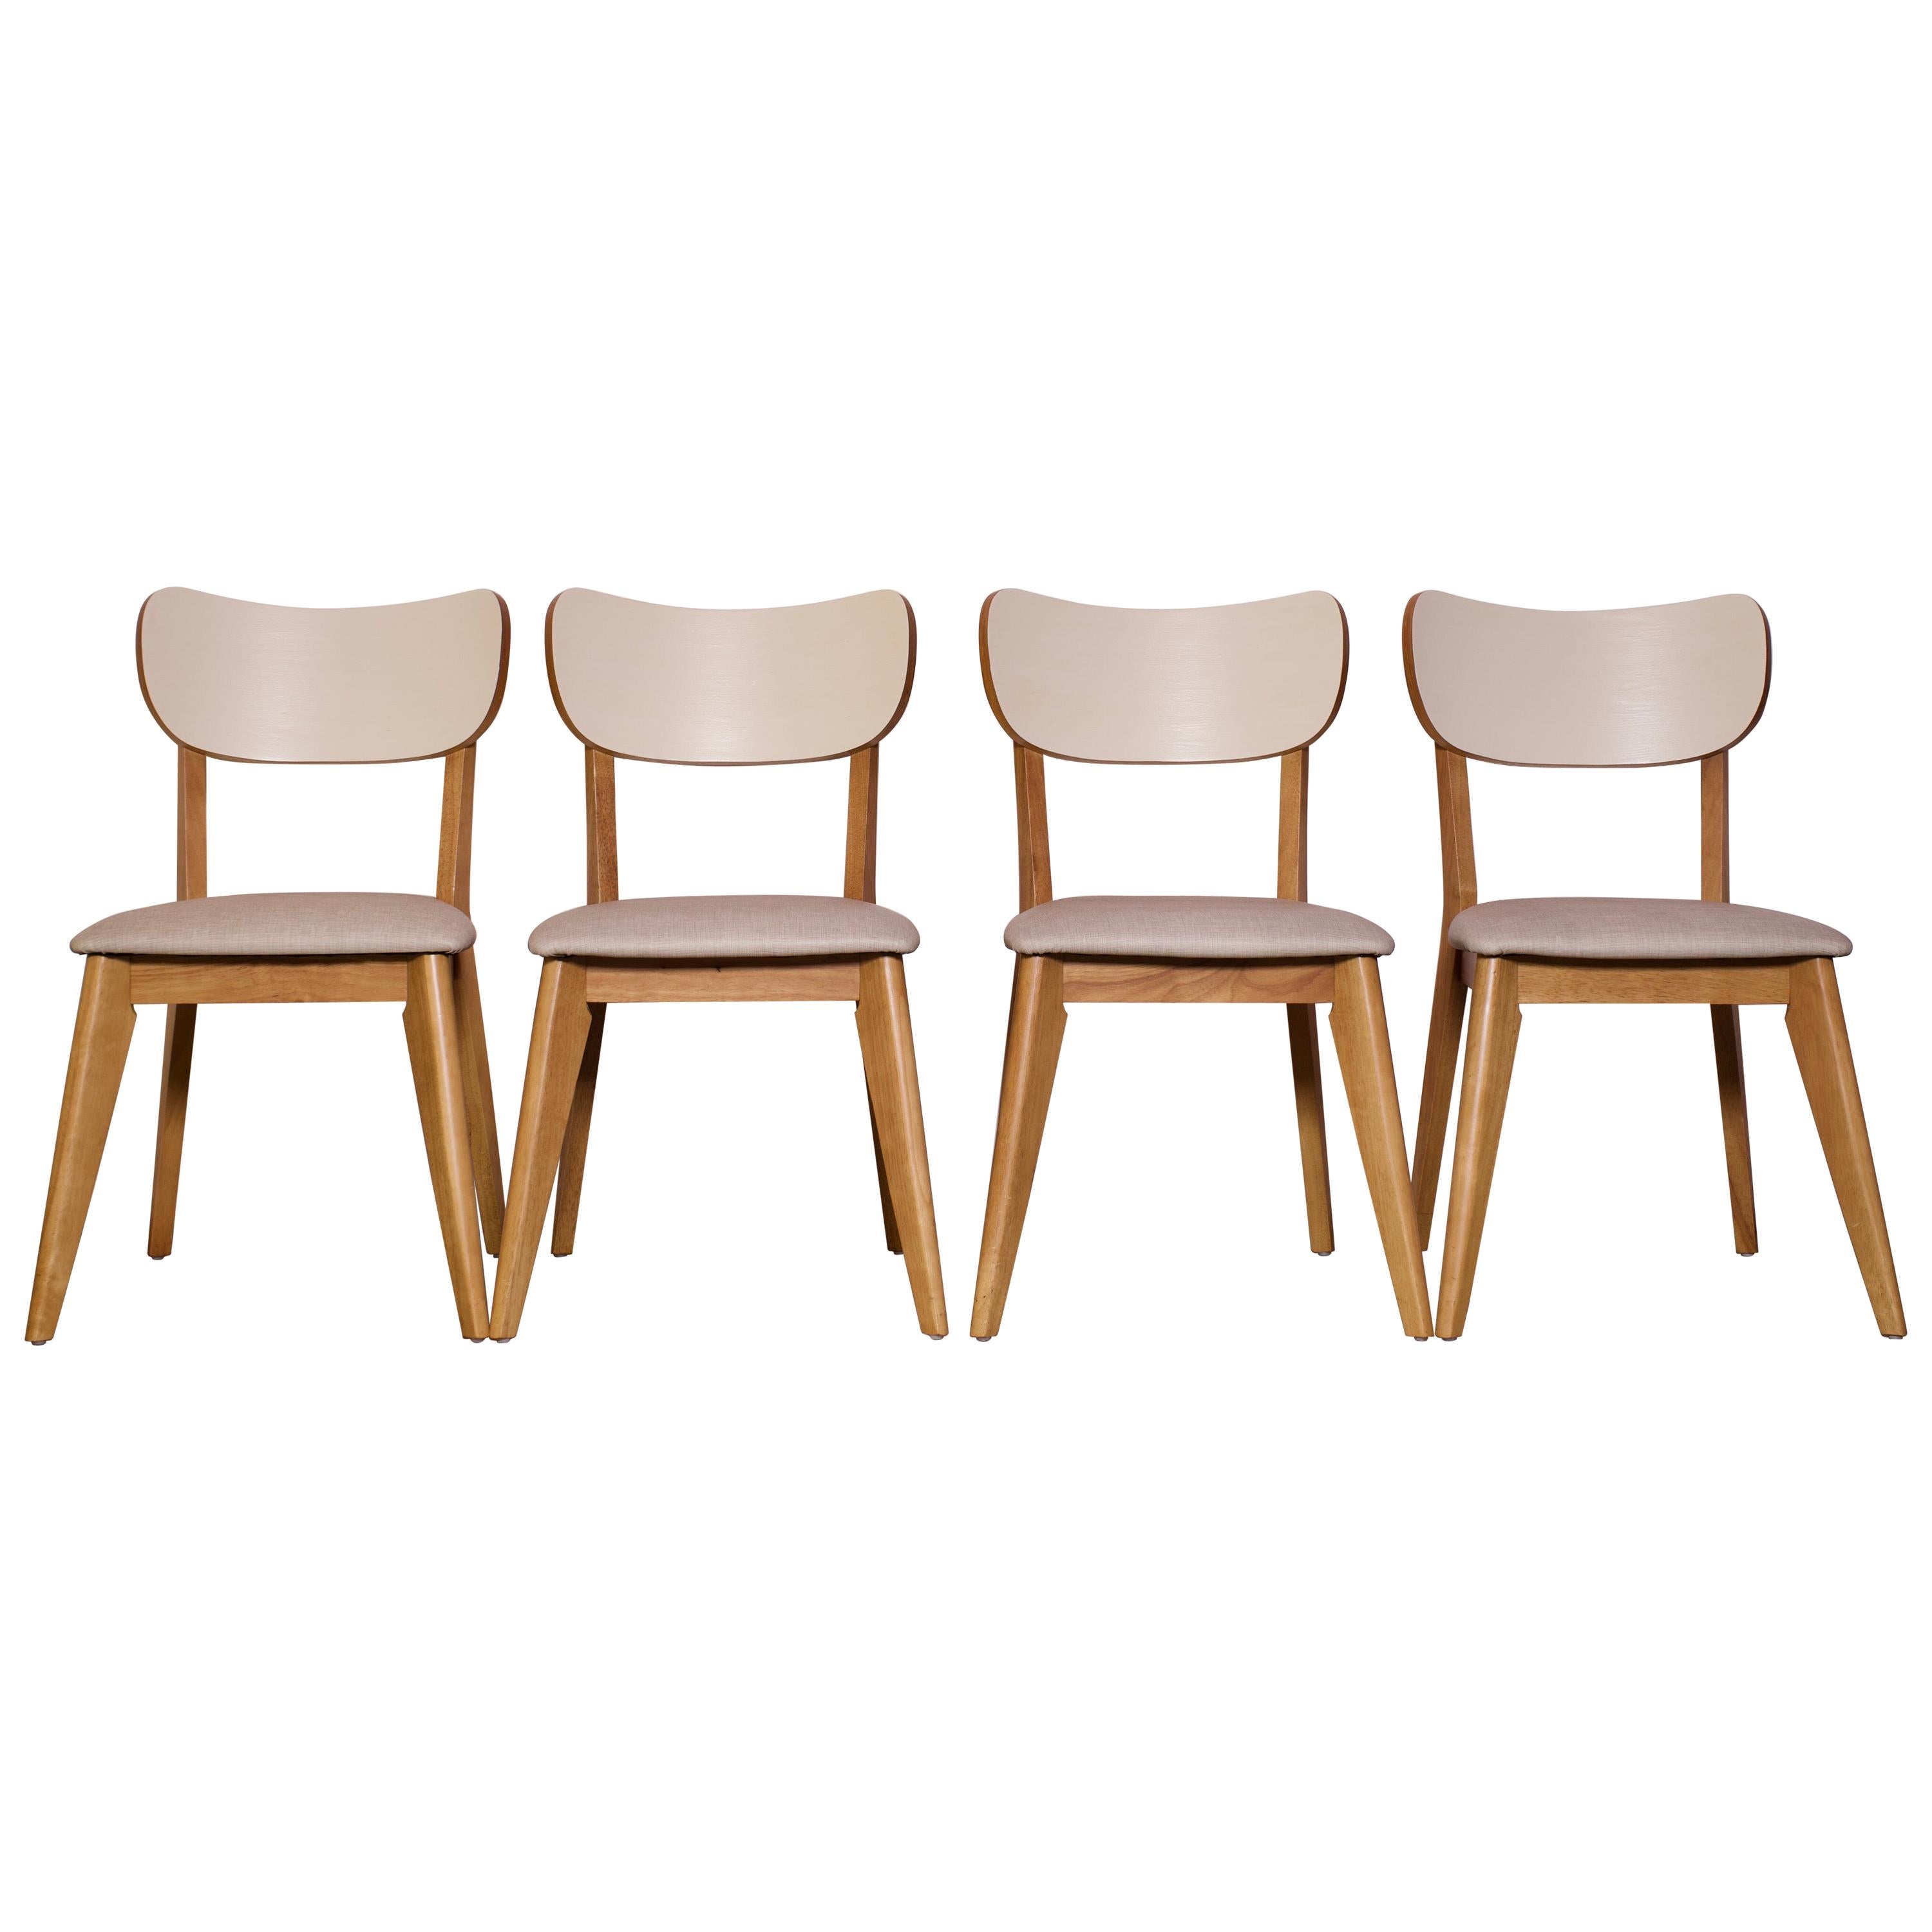 1960s Vintage Contemporary Birch and Vinyl Dining Chairs, Set of 4